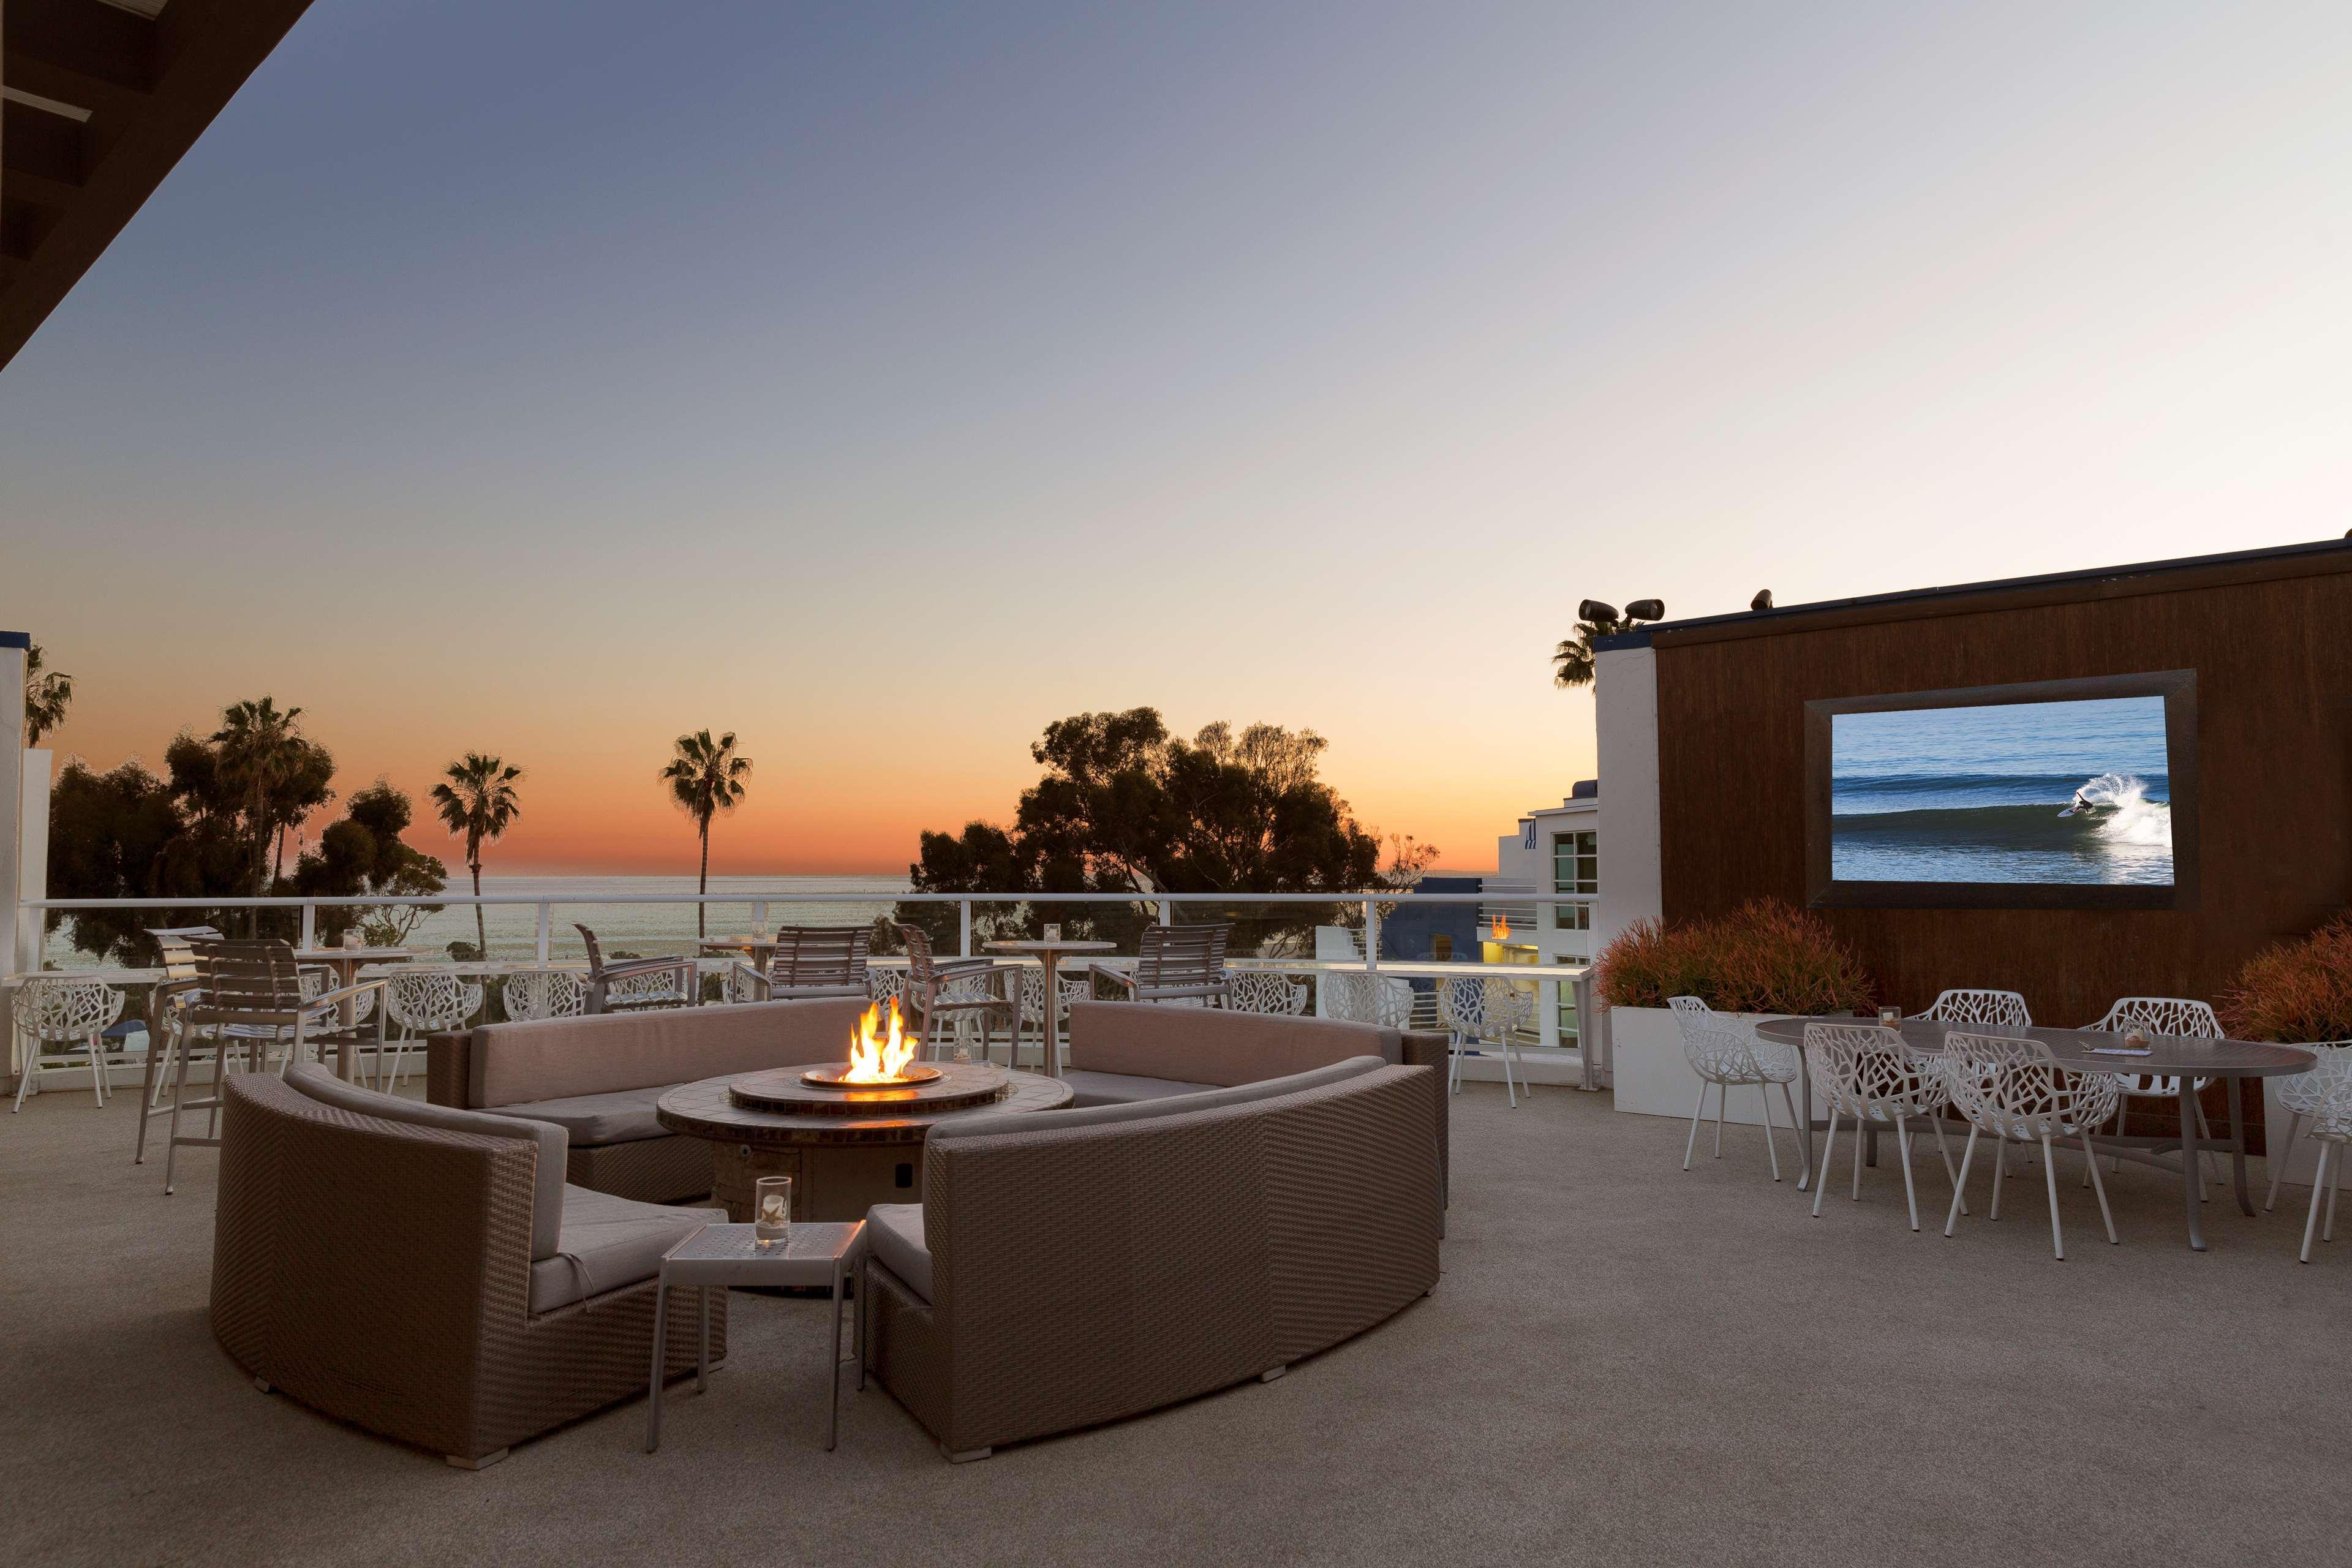 Doubletree Suites By Hilton Doheny Beach Dana Point Exterior foto